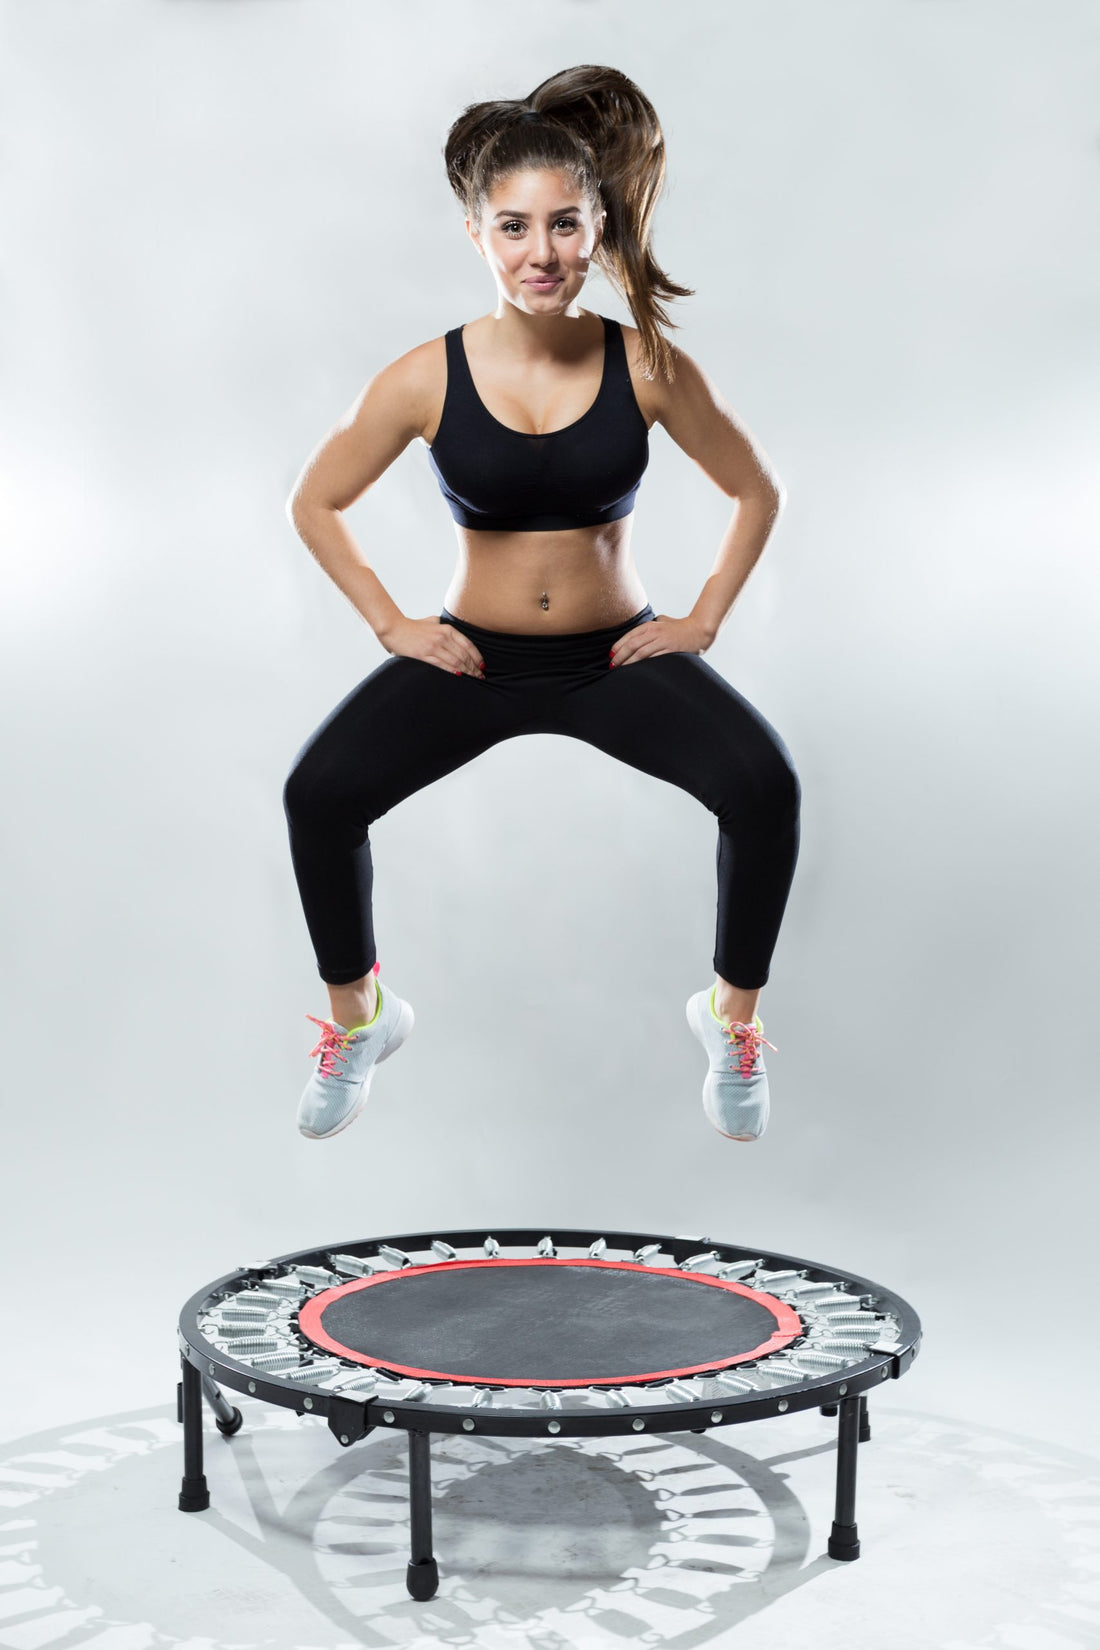 Staying Safe While Exercising on a Mini-Trampoline